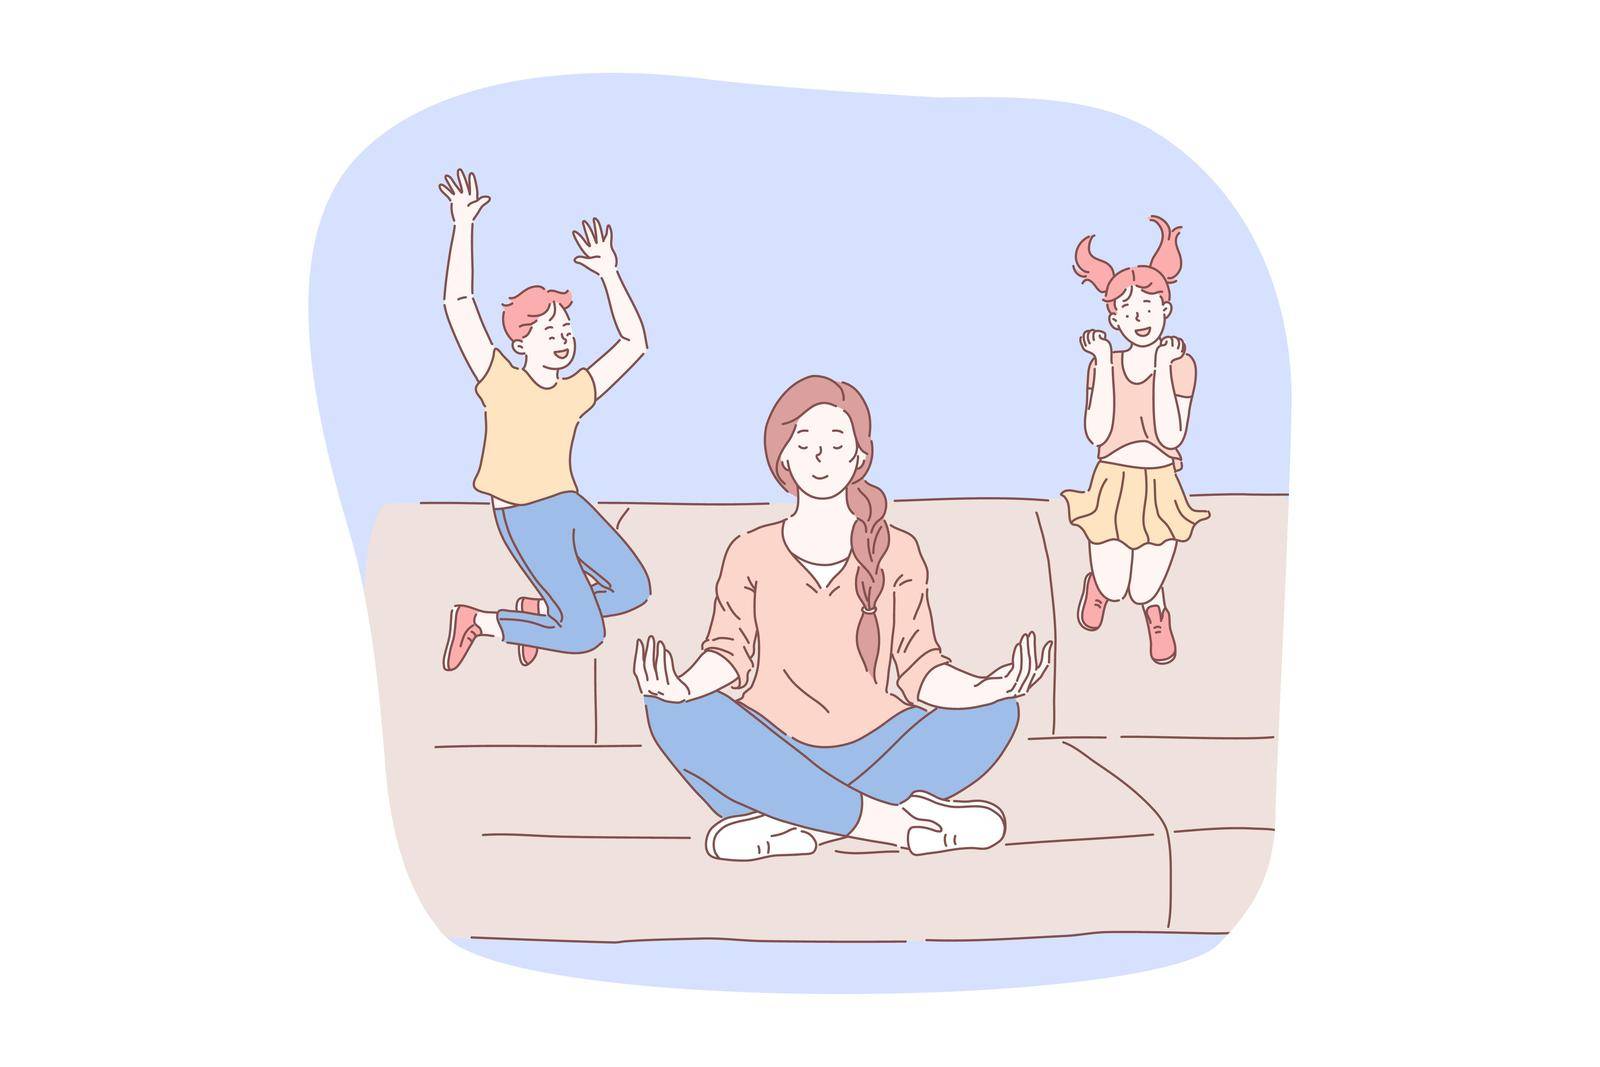 Meditation, relaxation during stress, concentration concept. Young woman mother sitting in lotus position with eyes closed and meditating with jumping and playing on sofa children at background